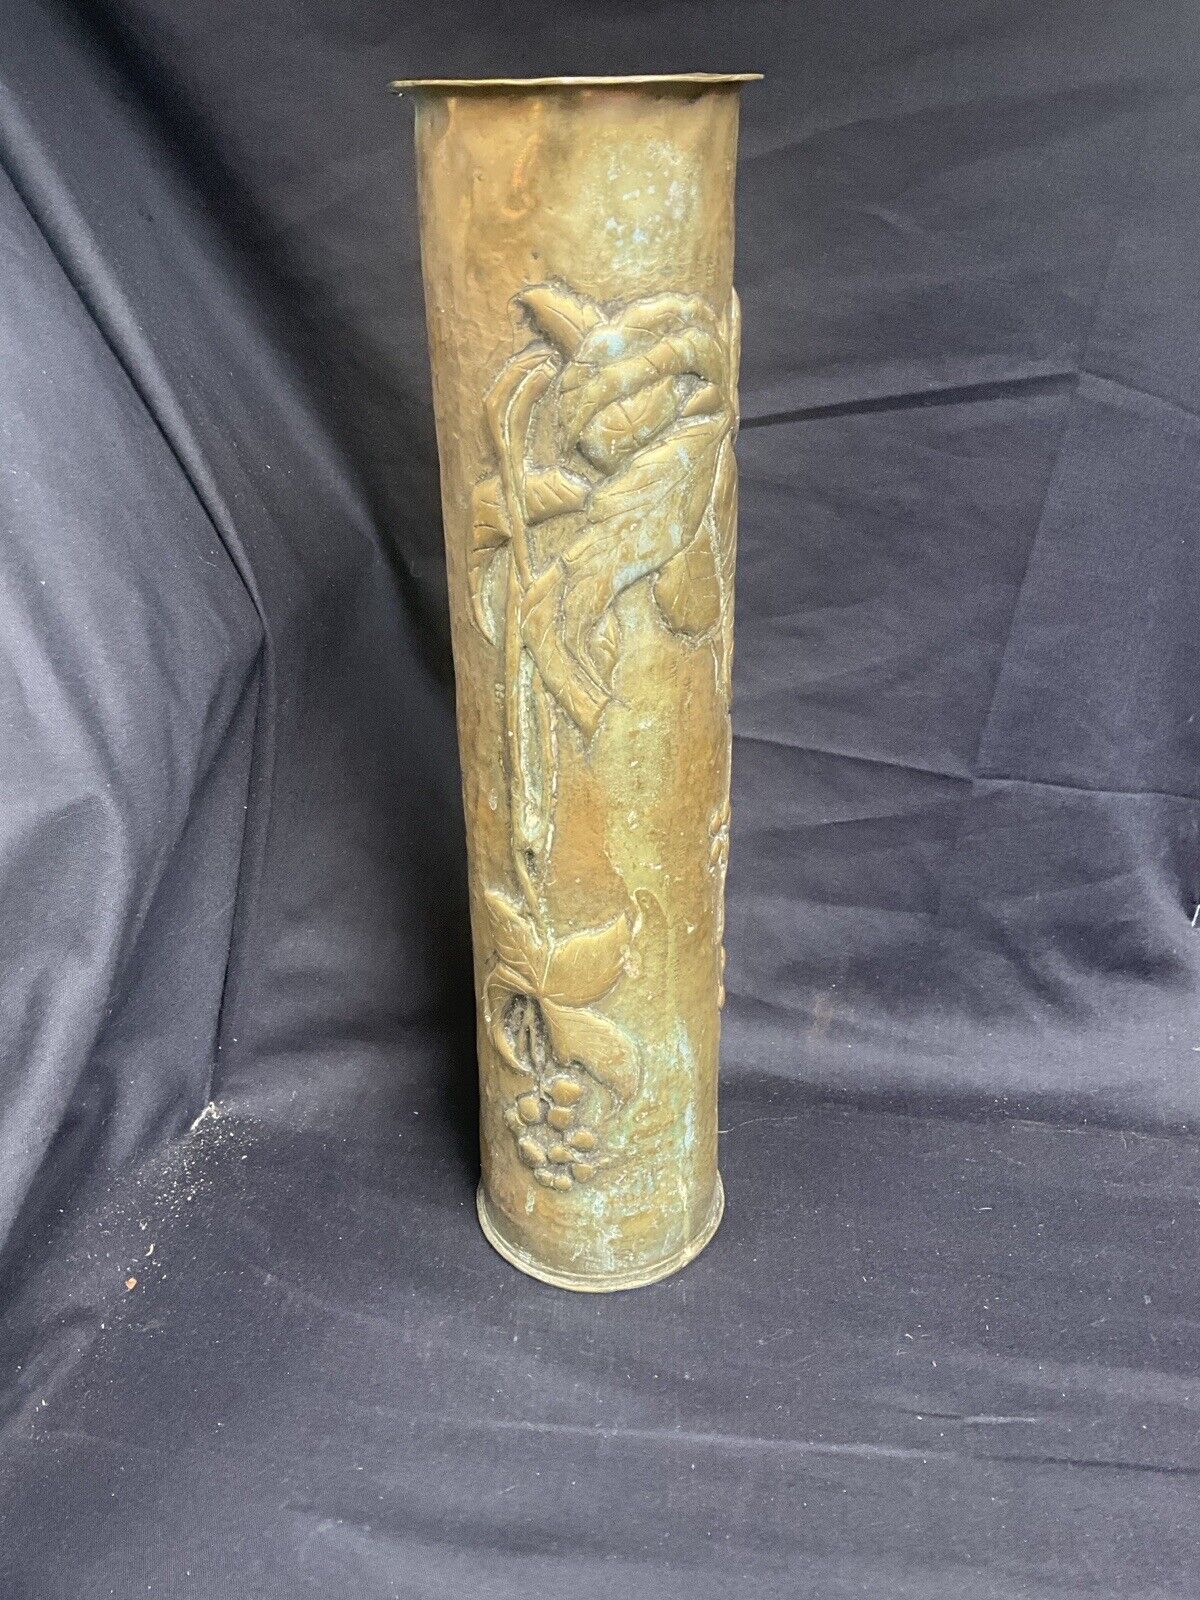 WW1 TRENCH ART SHELL WITH GRAPES FLOWER DESIGN 13.5 INCHES 1915-16